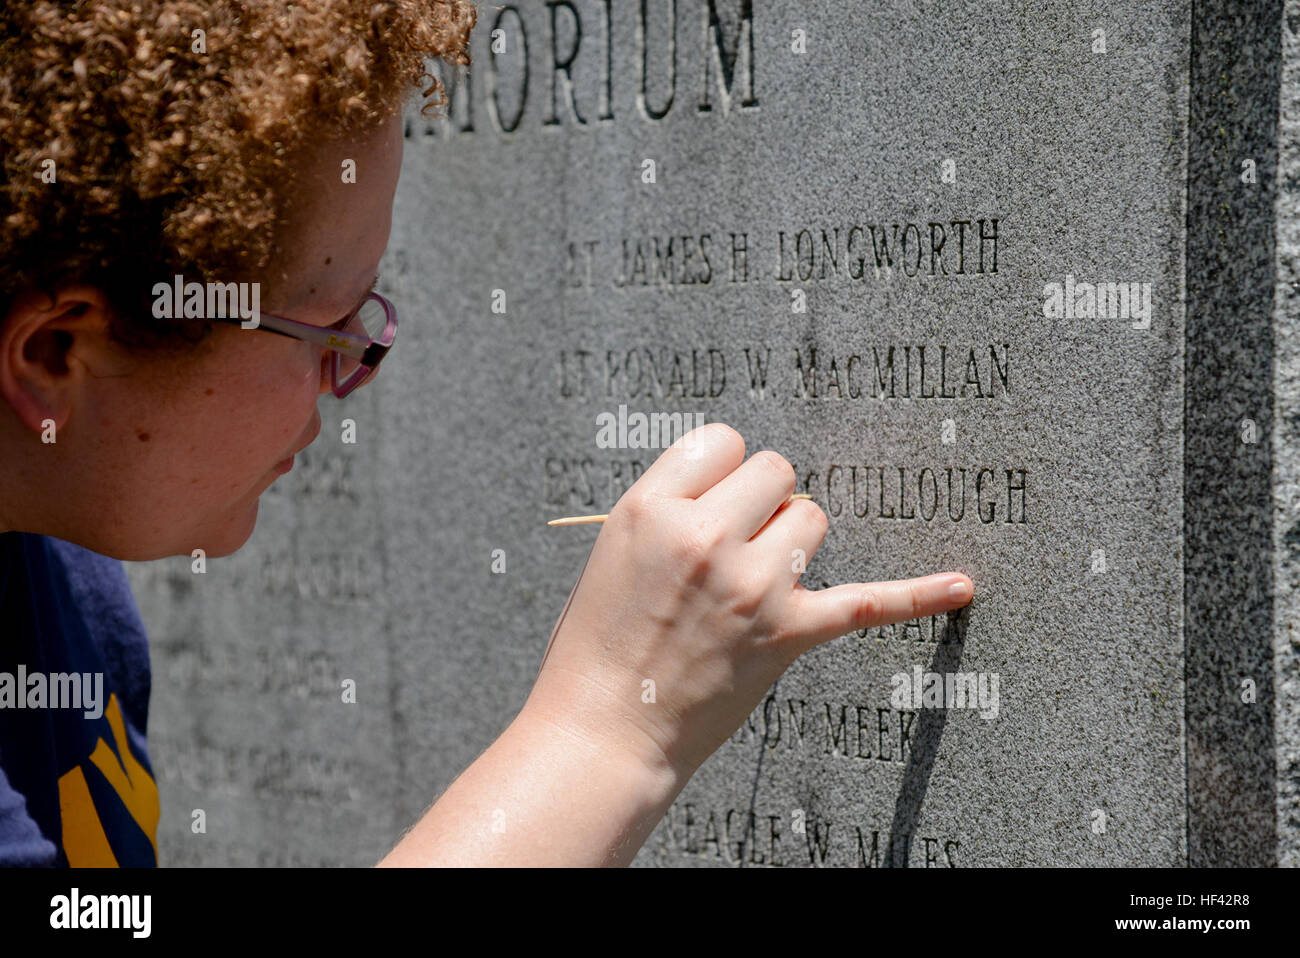 Melissa Swanson, Naval History and Heritage Command Conservator, uses a wooden pick to remove lichens growing inside the letters of inscriptions on a U.S. Navy VC-4 memorial marker, located near the main gate of the 177th Fighter Wing of the New Jersey Air National Guard in Egg Harbor Township, N.J., on July 20, 2016. The monument, erected in May 1994 by the Association of The Composite Squadron Four Nightcappers, pays tribute to the members of the VC-4 Squadron based at Naval Air Station Atlantic City from September 1948 to May 1958 who gave the ultimate sacrifice. Swanson, based out of Richm Stock Photo